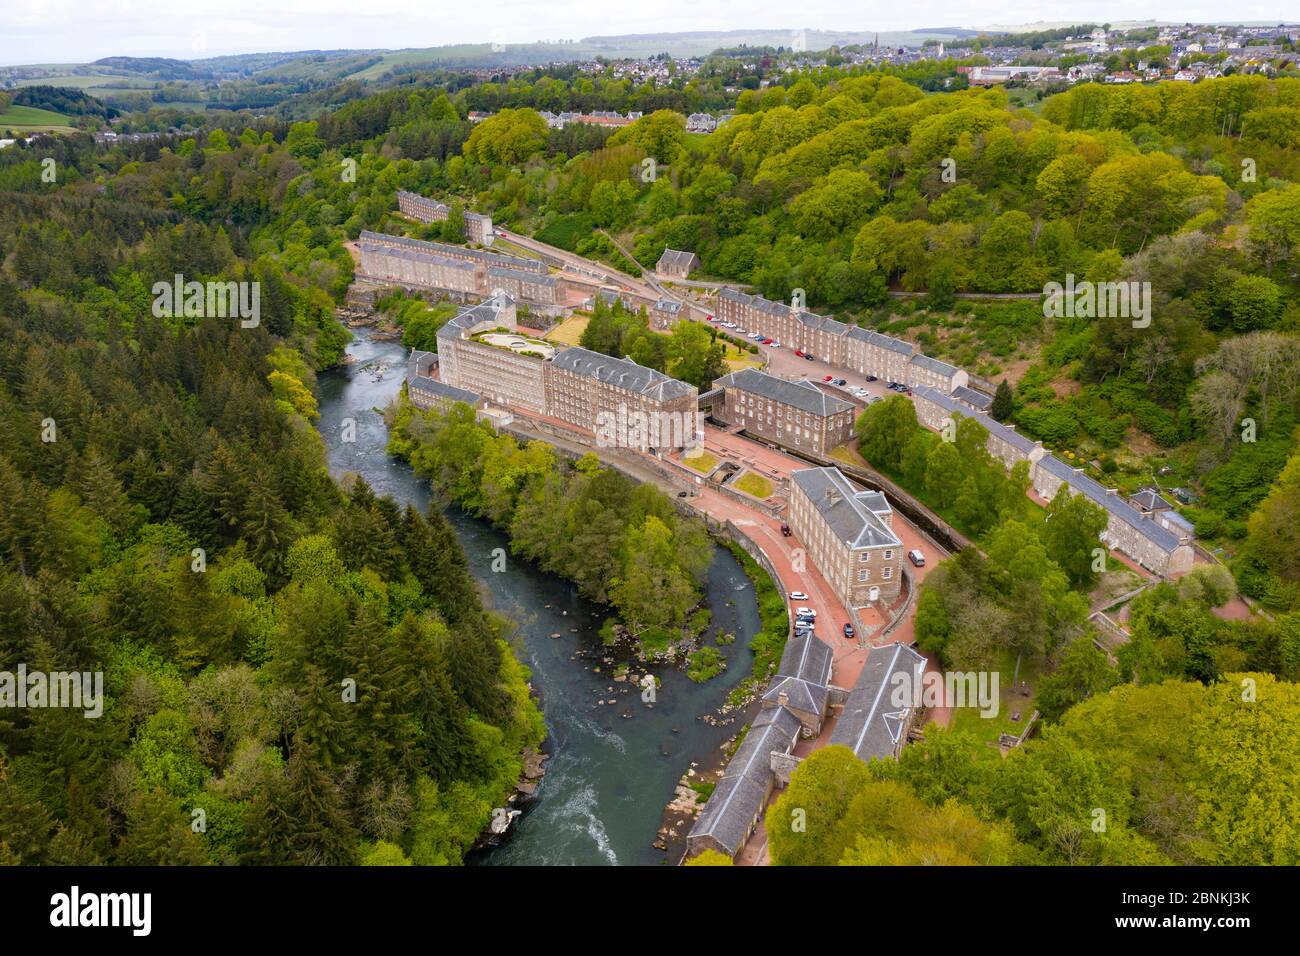 Aerial view of New Lanark World Heritage Site closed during covid-19 lockdown, beside River Clyde in South Lanarkshire, Scotland, UK Stock Photo